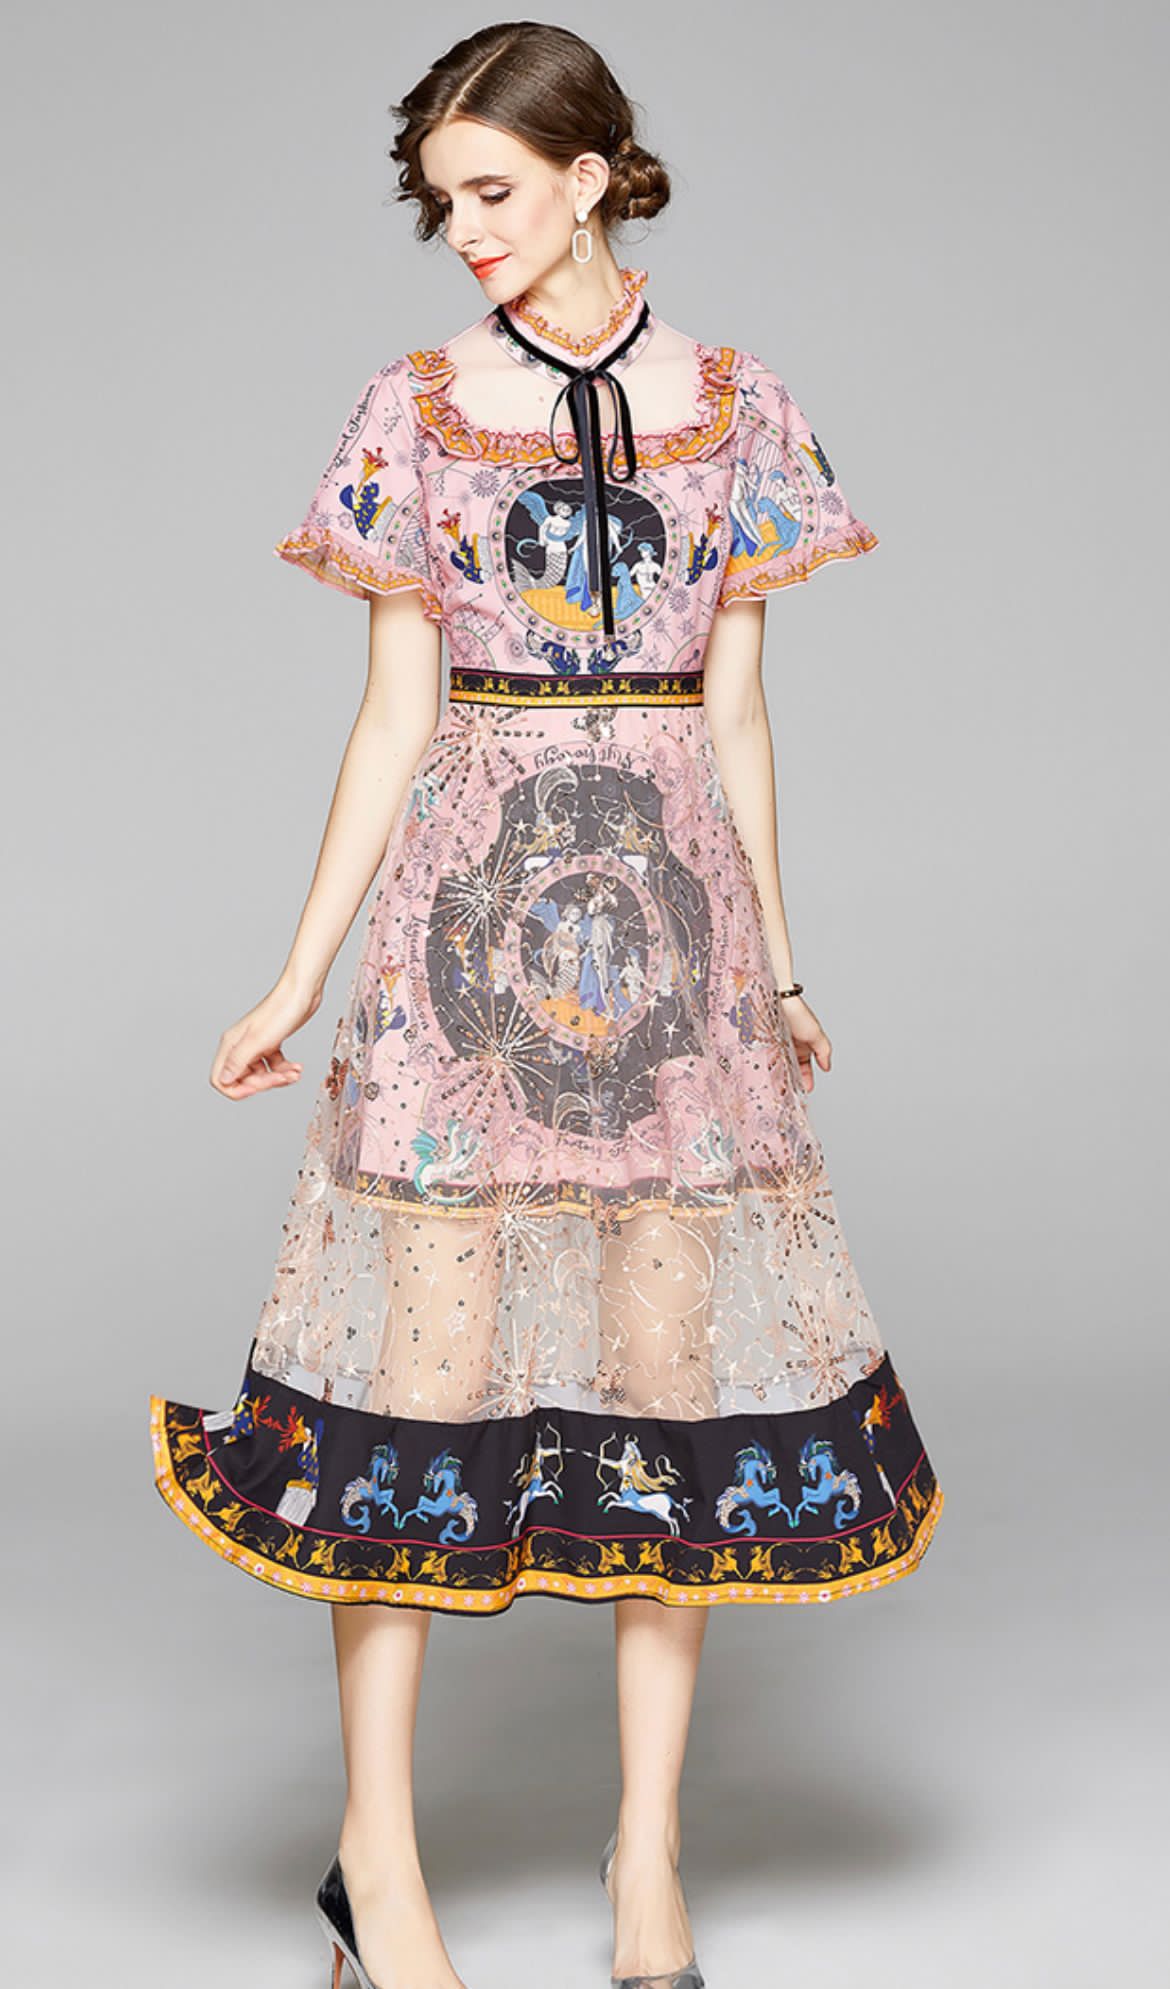 Mystical creatures short sleeve dress with sheer panel